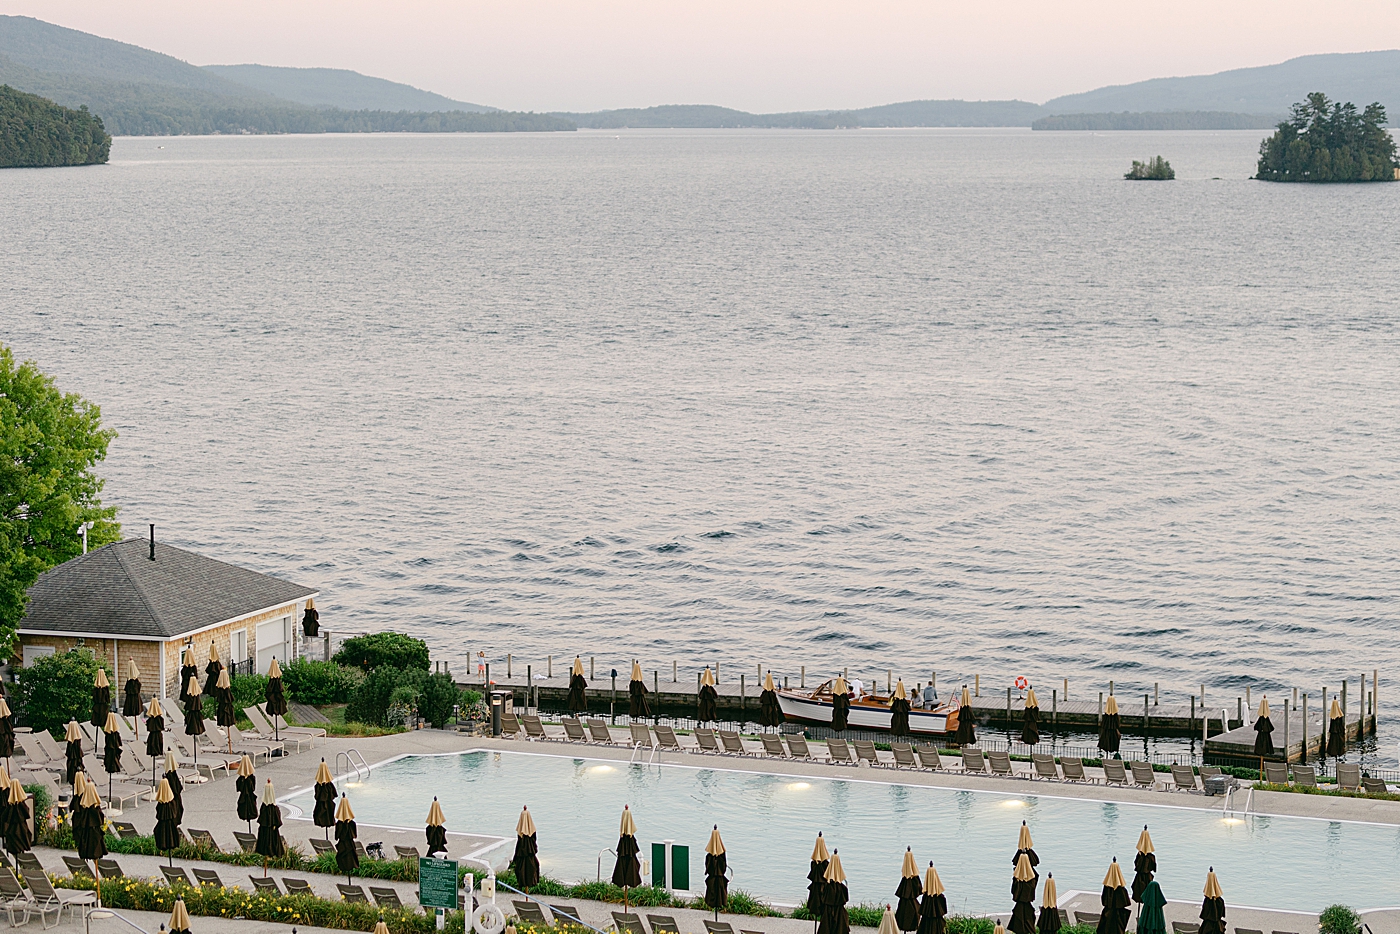 Location image of the harbor with a pool in the foreground | Image by Hope Helmuth Photography